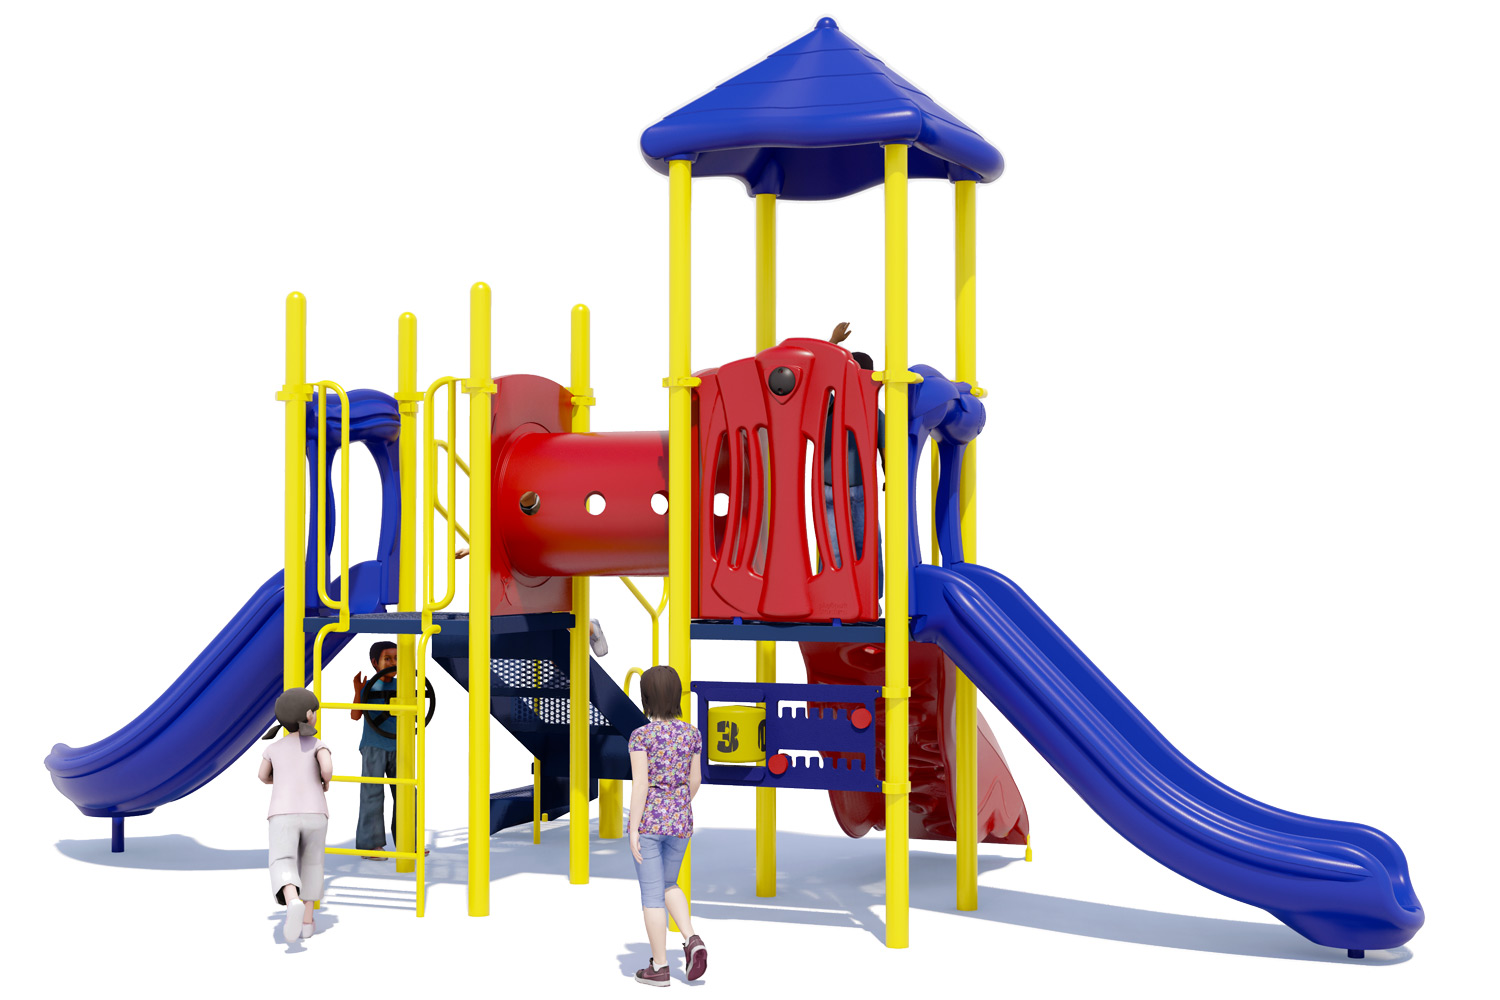 Play Date commercial playground designed for children ages 2-12